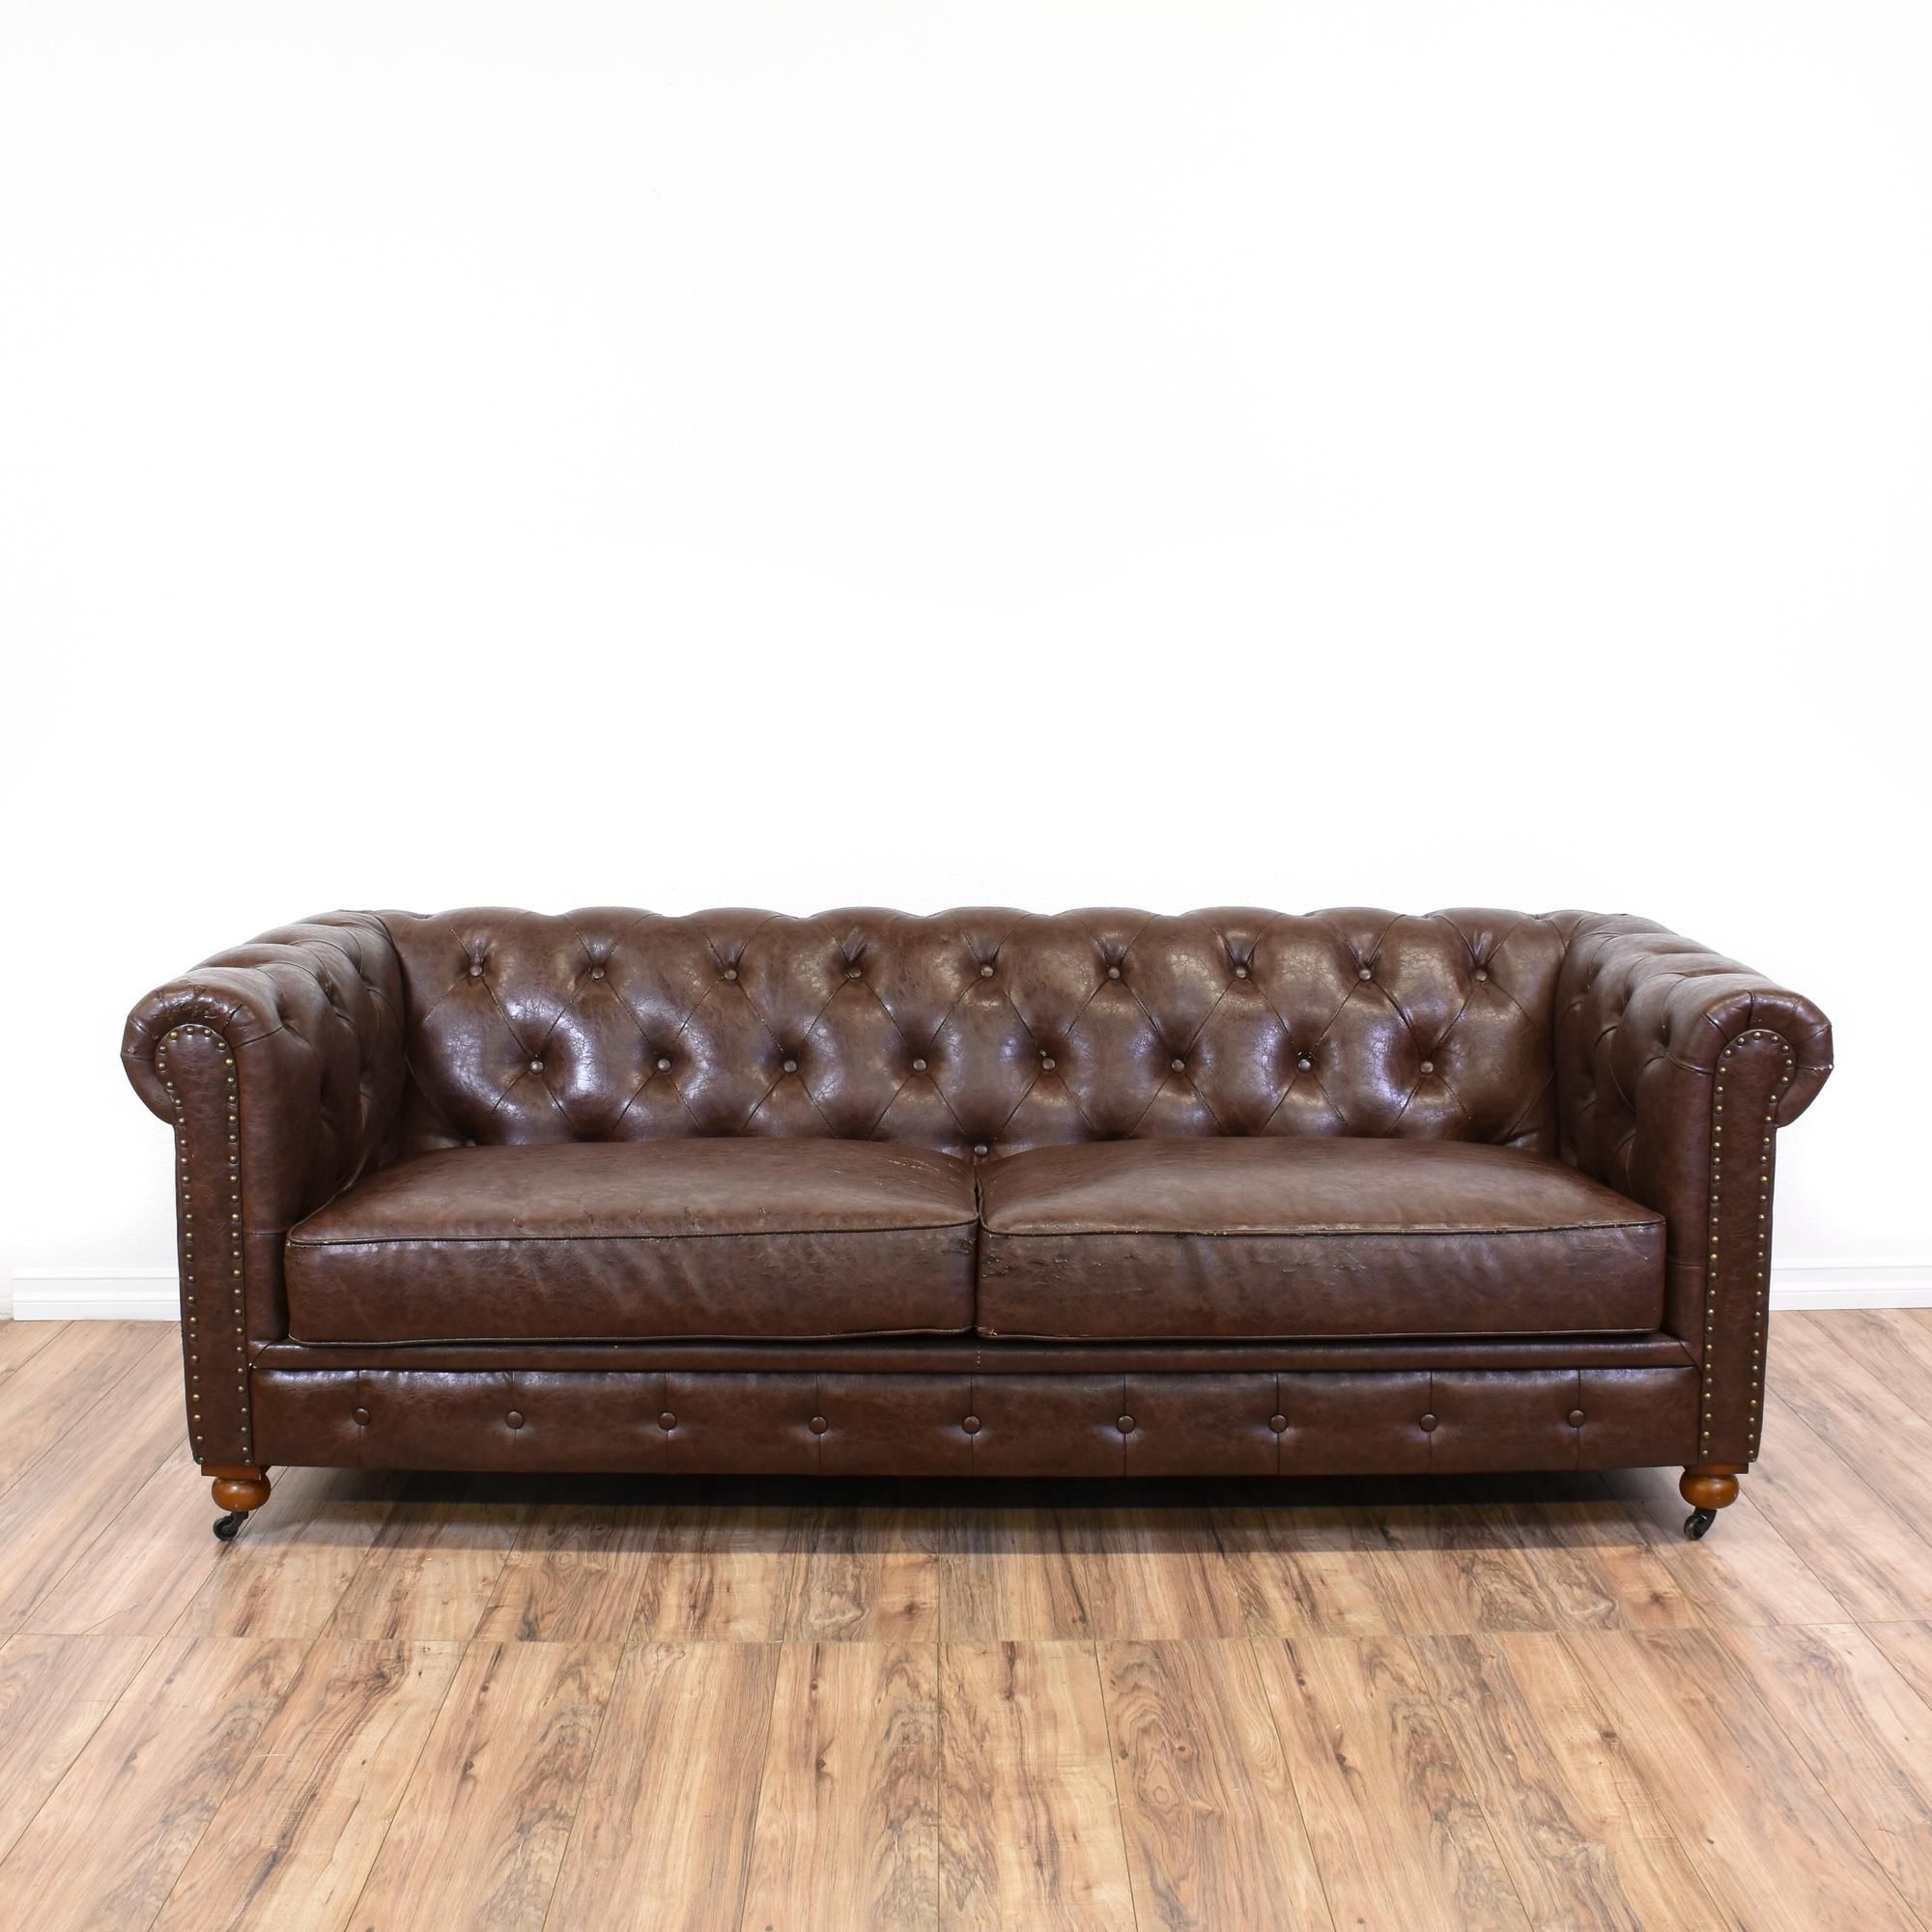 This Chesterfield Sofa Is Upholstered In A Faux Brown Leather With A With Recent Faux Leather Sofas In Dark Brown (Photo 10 of 15)